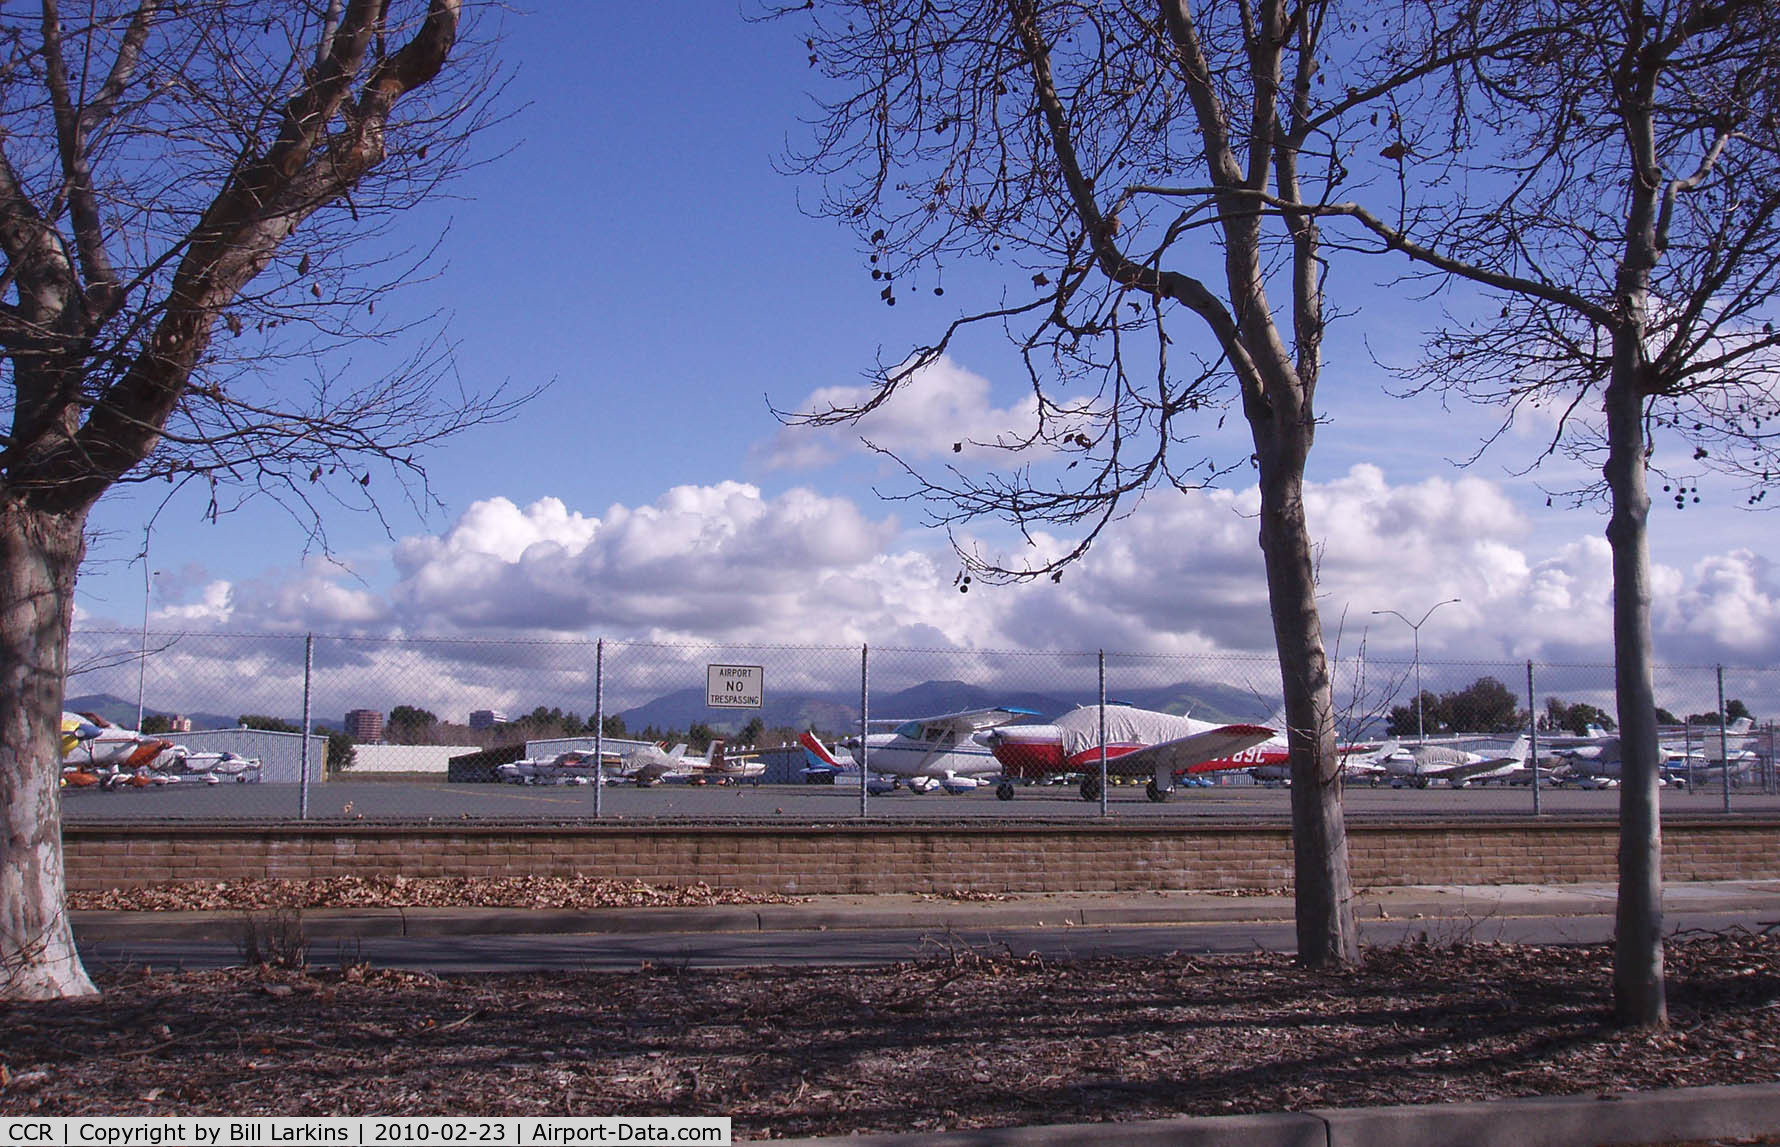 Buchanan Field Airport (CCR) - Part of the East ramp with Mt Diablo in the background.